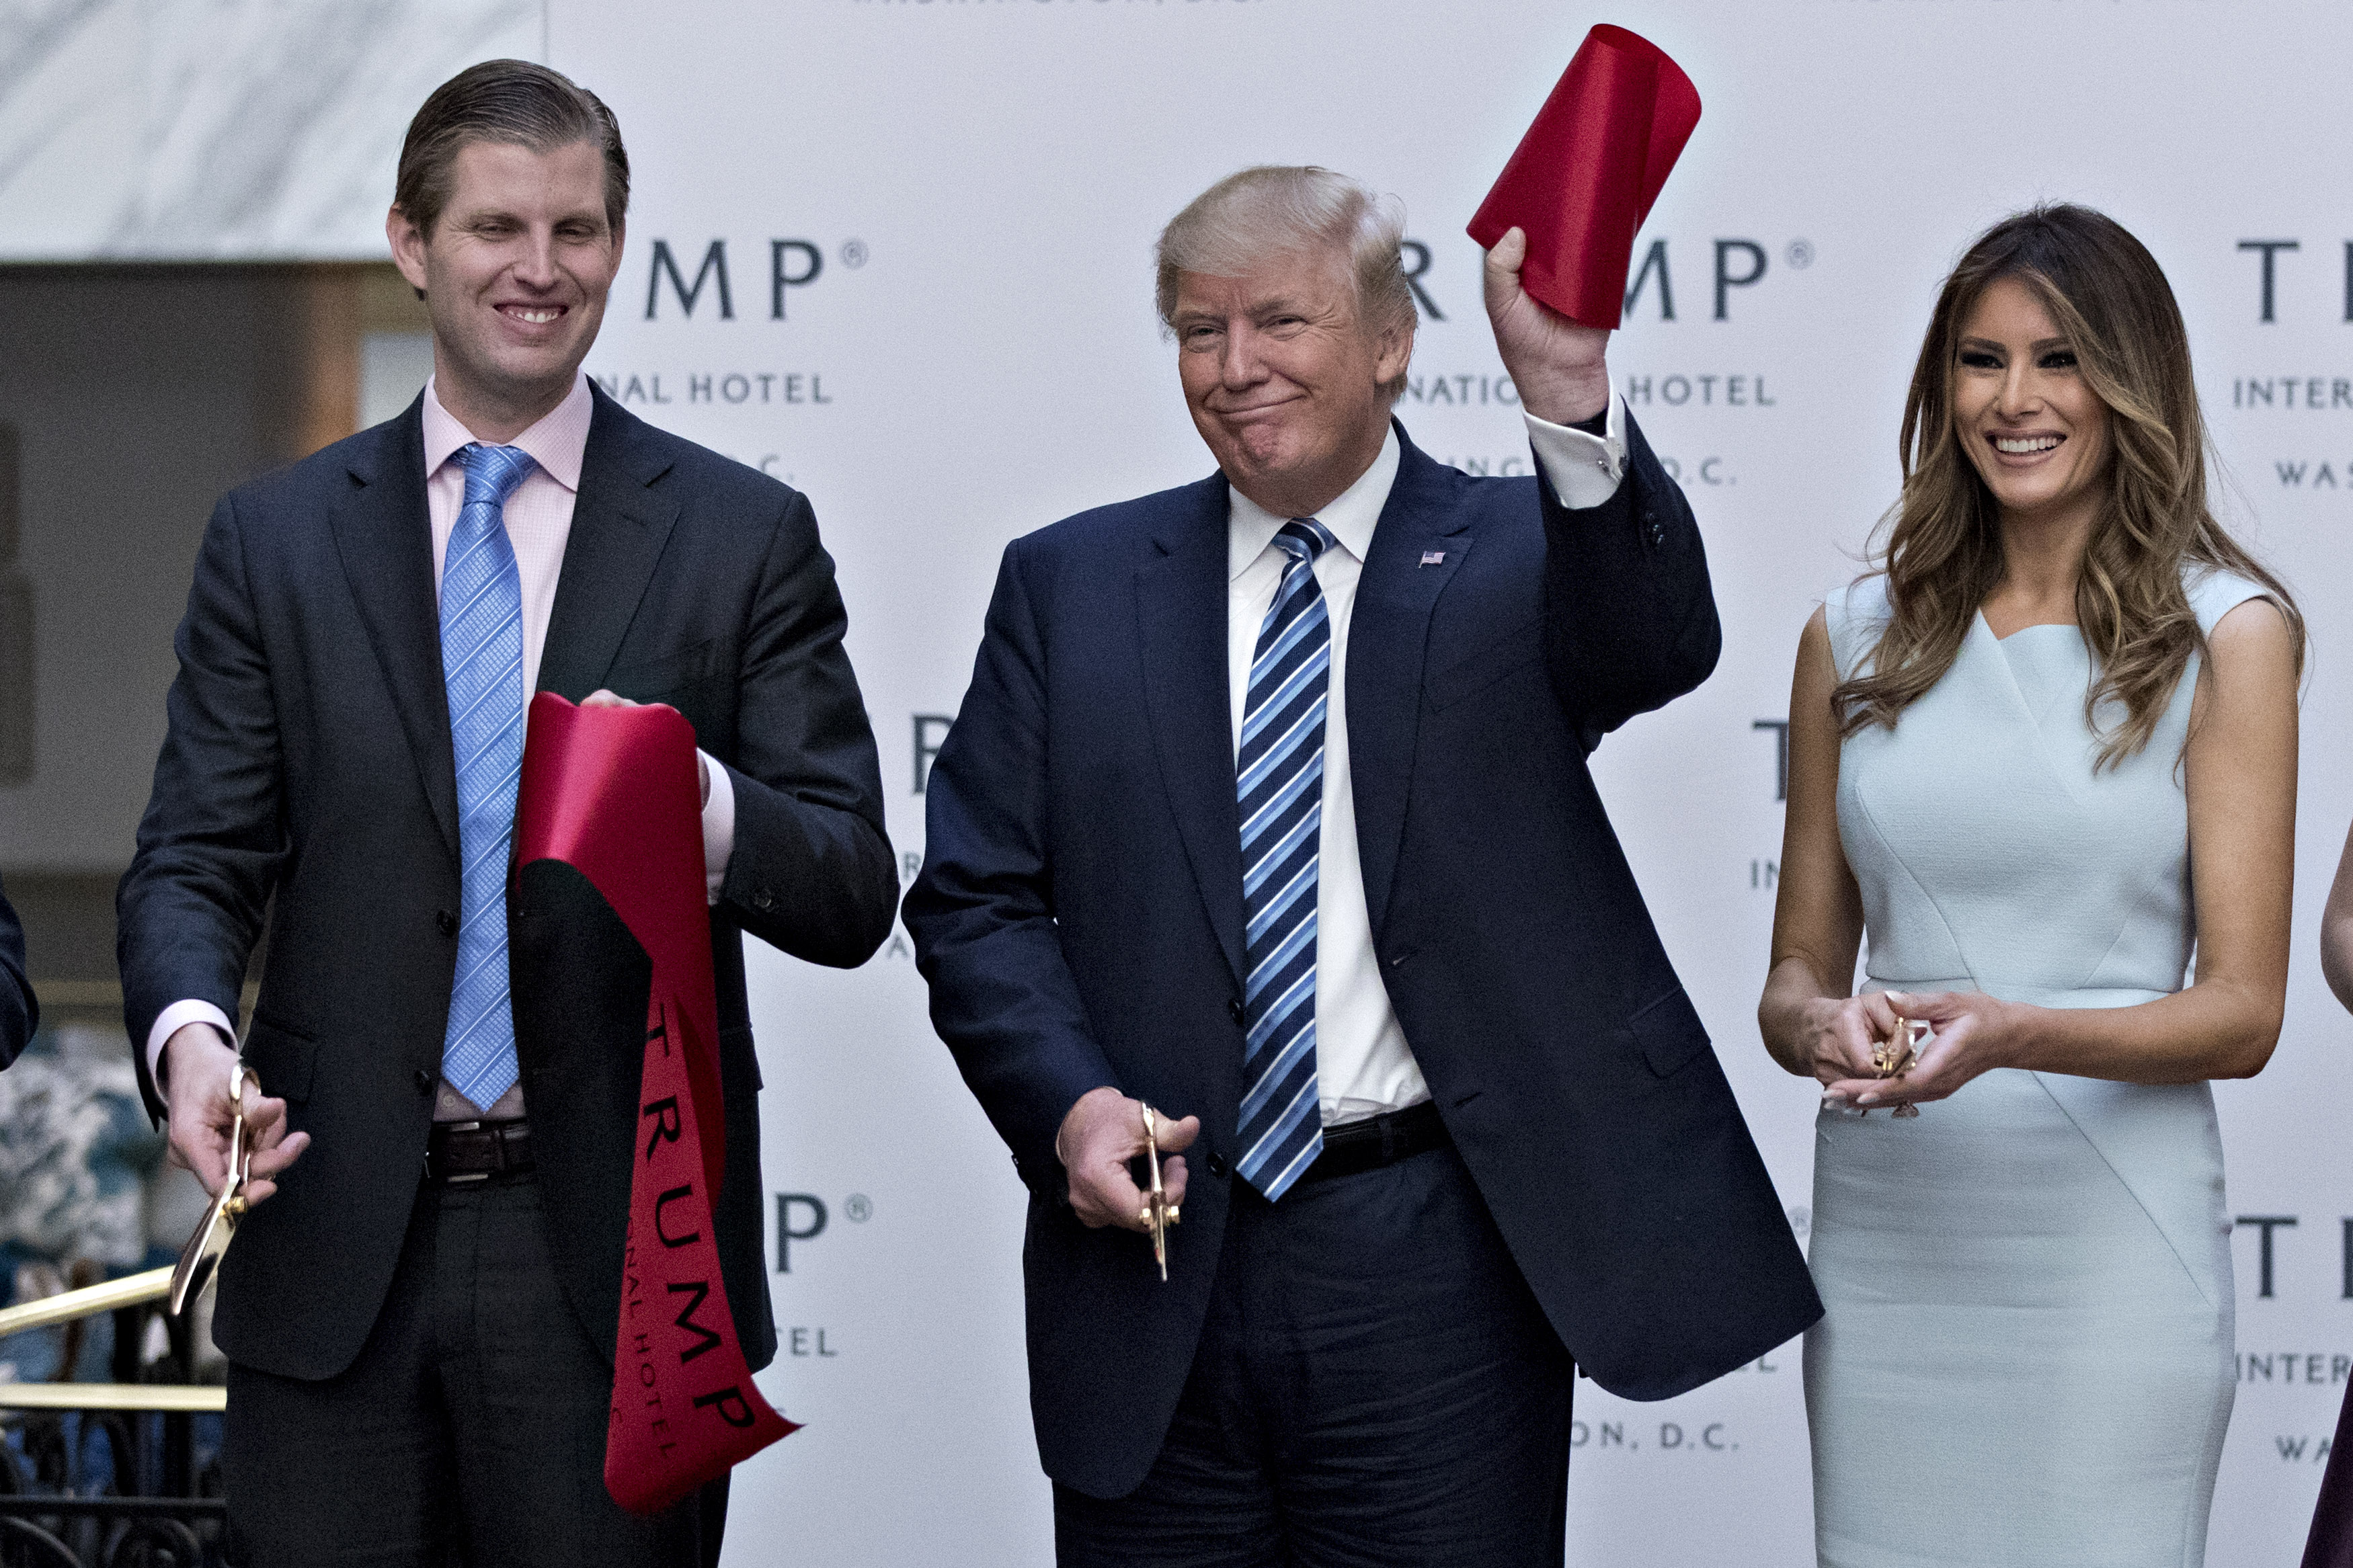 Donald Trump holds a piece of ribbon next to his wife Melania Trump, right, and his son Eric Trump during the grand opening ceremony of the Trump International Hotel in Washington, D.C., U.S., on Wednesday, Oct. 26, 2016. (Andrew Harrer&mdash;Bloomberg /Getty Images)